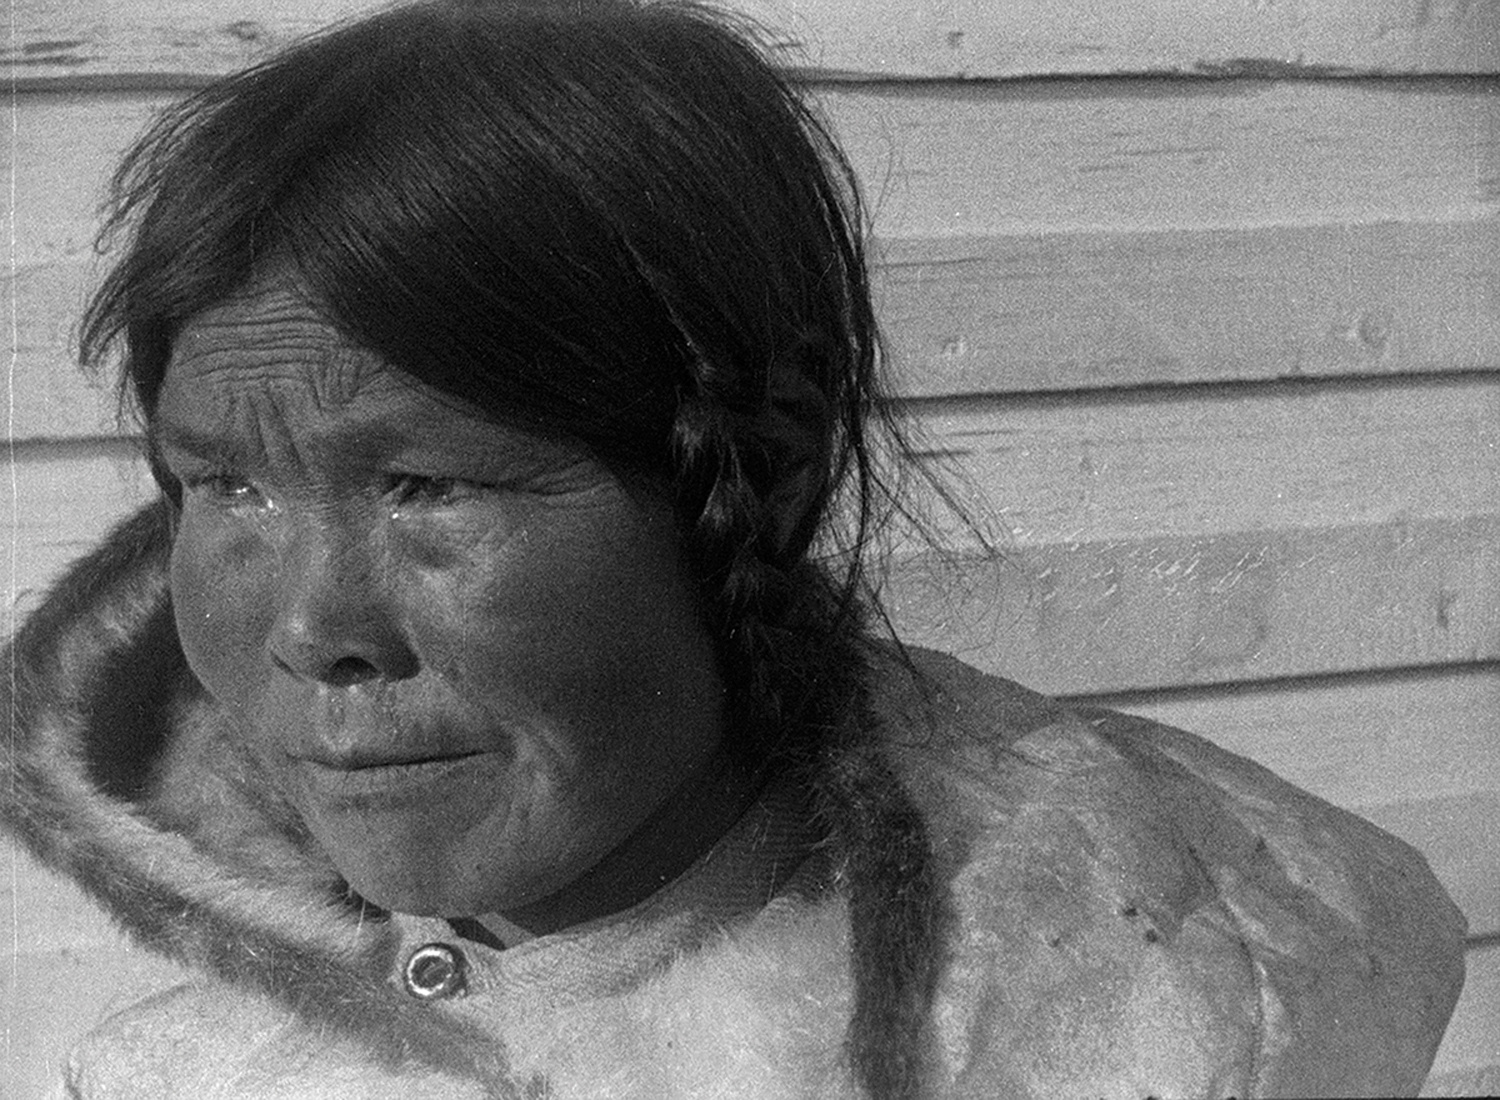     NFB Archives, Arctic Expedition, 1923. Film still from Jeff Barnaby’s Etlinisigu’niet (Bleed Down), from the series Souvenir, 2015. © National Film Board of Canada.

